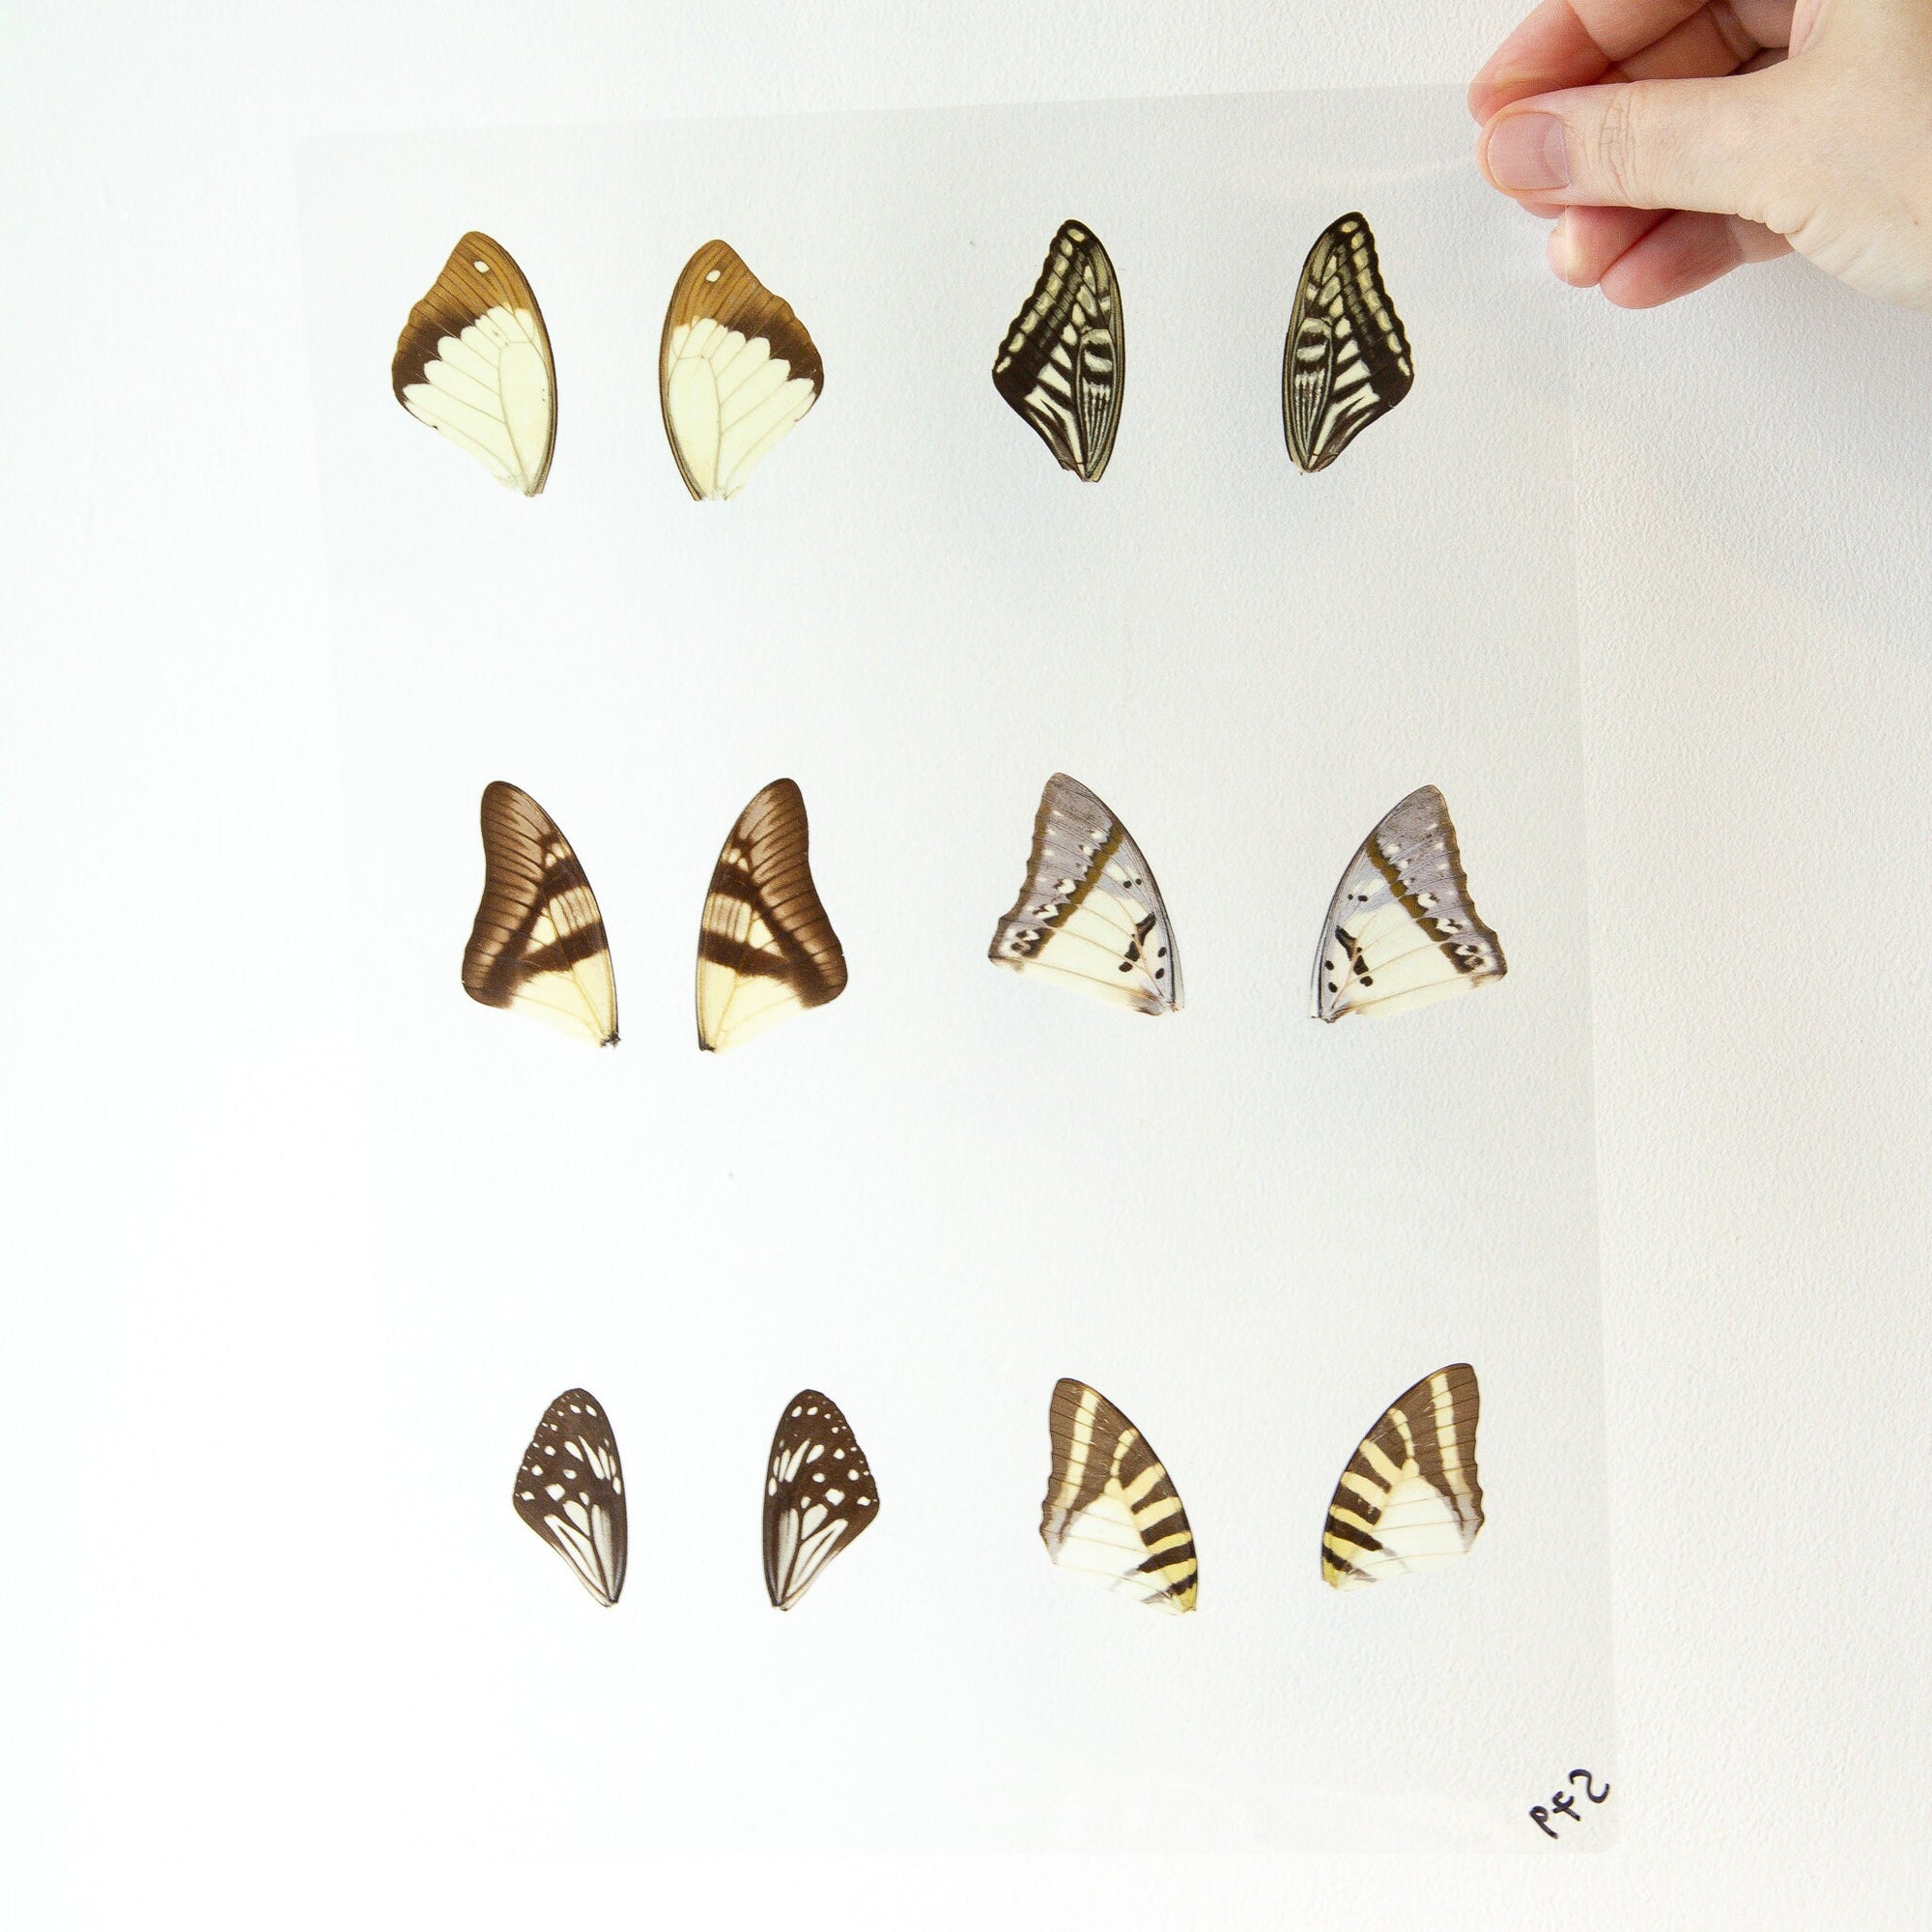 Butterfly Wings GLOSSY LAMINATED SHEET Real Ethically Sourced Specimens Moths Butterflies Wings for Art -- S79